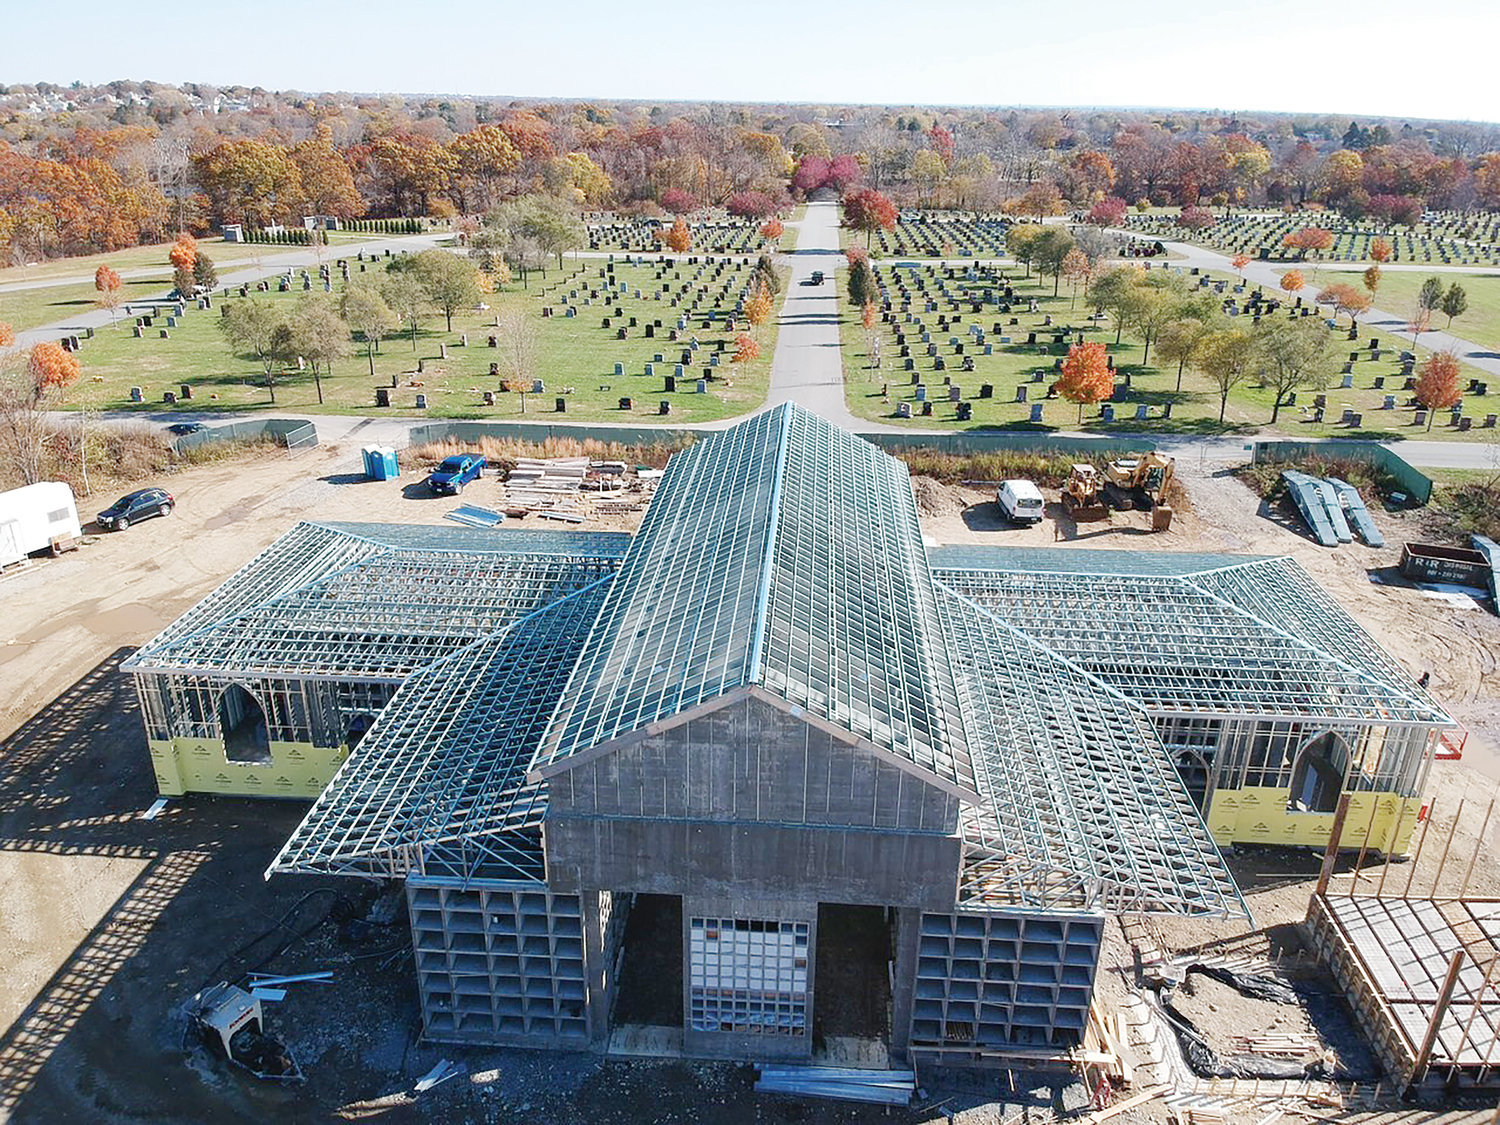 The mausoleum, which is under construction, will contain 2,086 casket spaces, 552 marble front niches and 122 glass front niches.